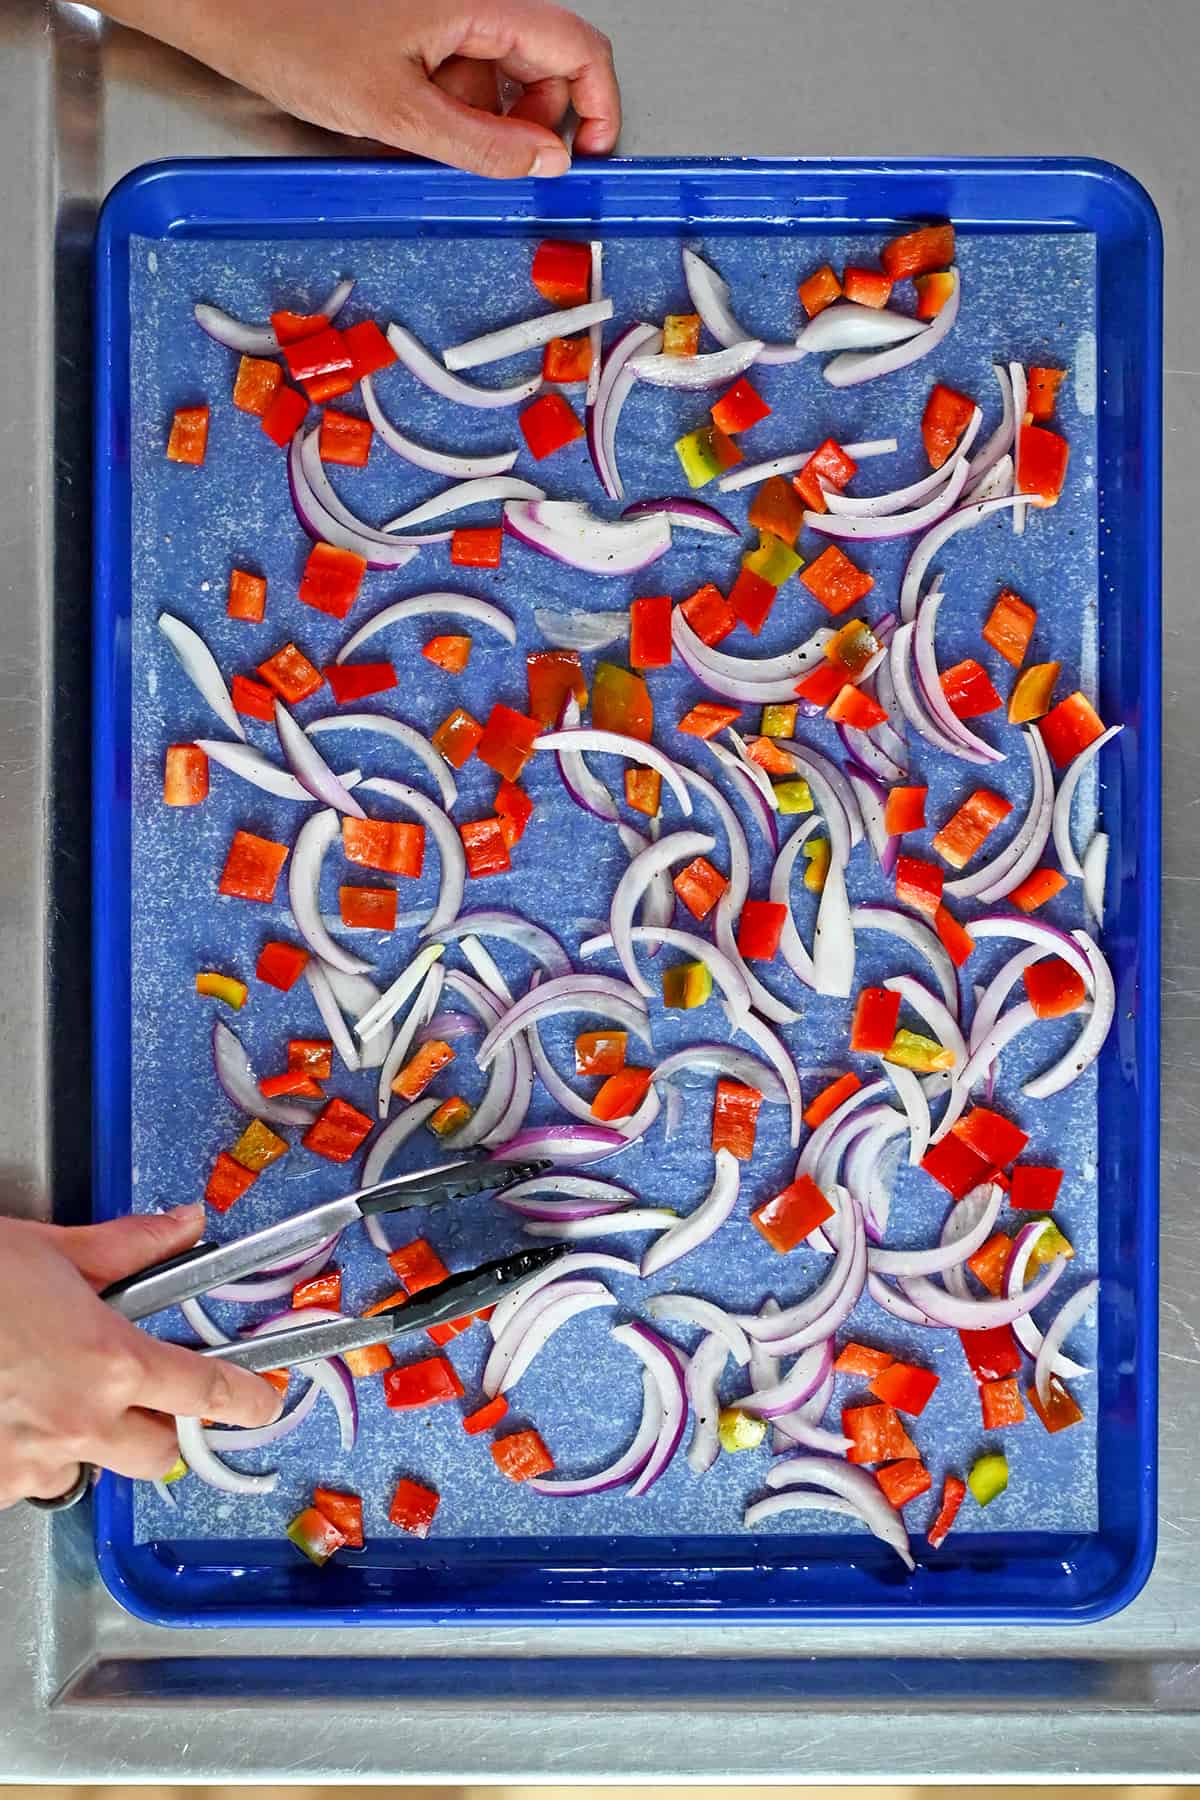 A pair of tongs is rearranging thinly sliced red onions and diced bell peppers in a single layer on a parchment lined rimmed baking sheet.